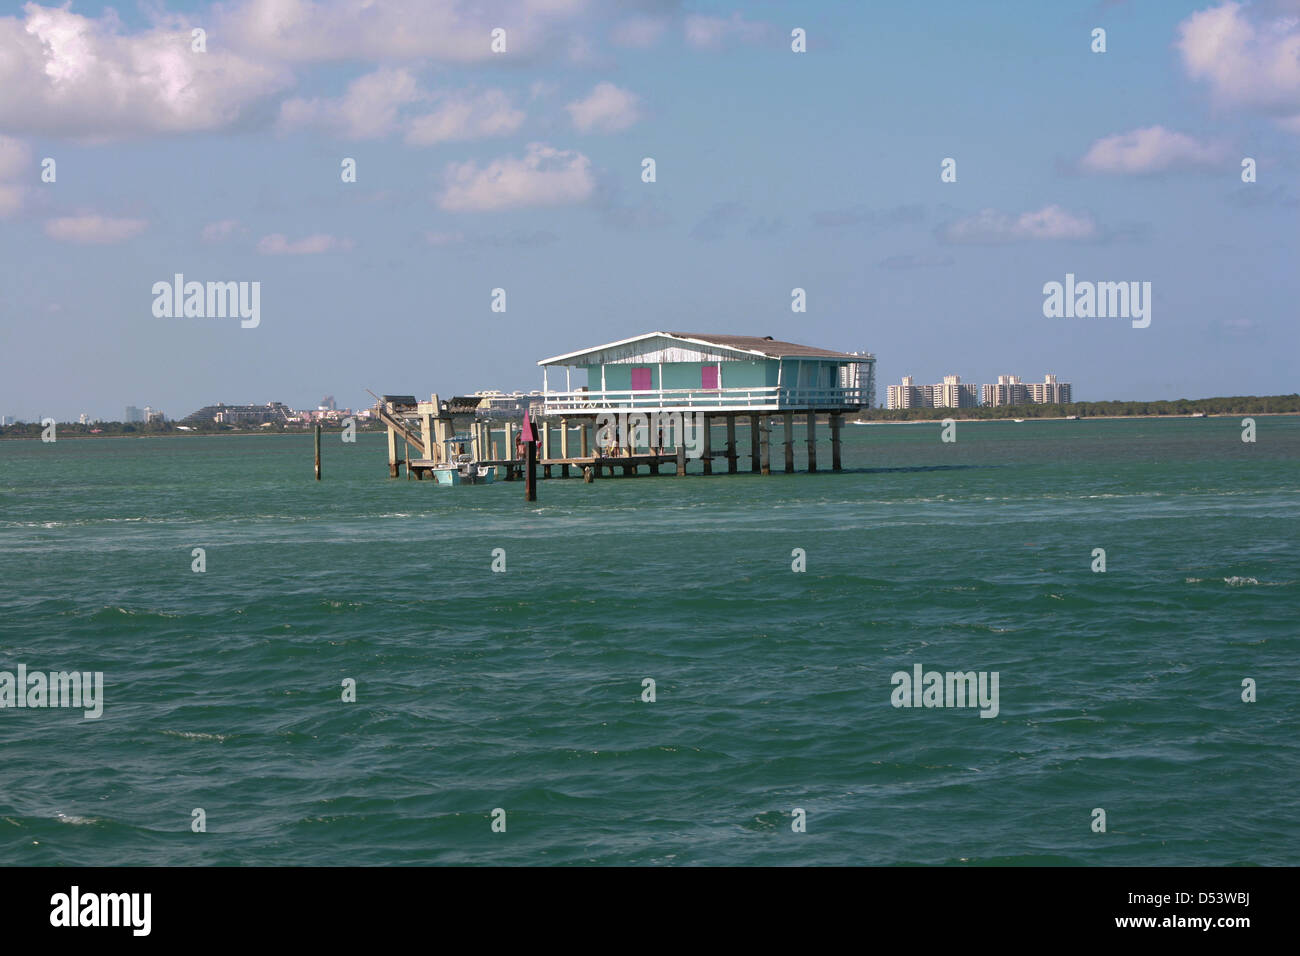 Stiltsville is a group of wood stilt houses located one mile south of Cape Florida, Biscayne Bay Stock Photo